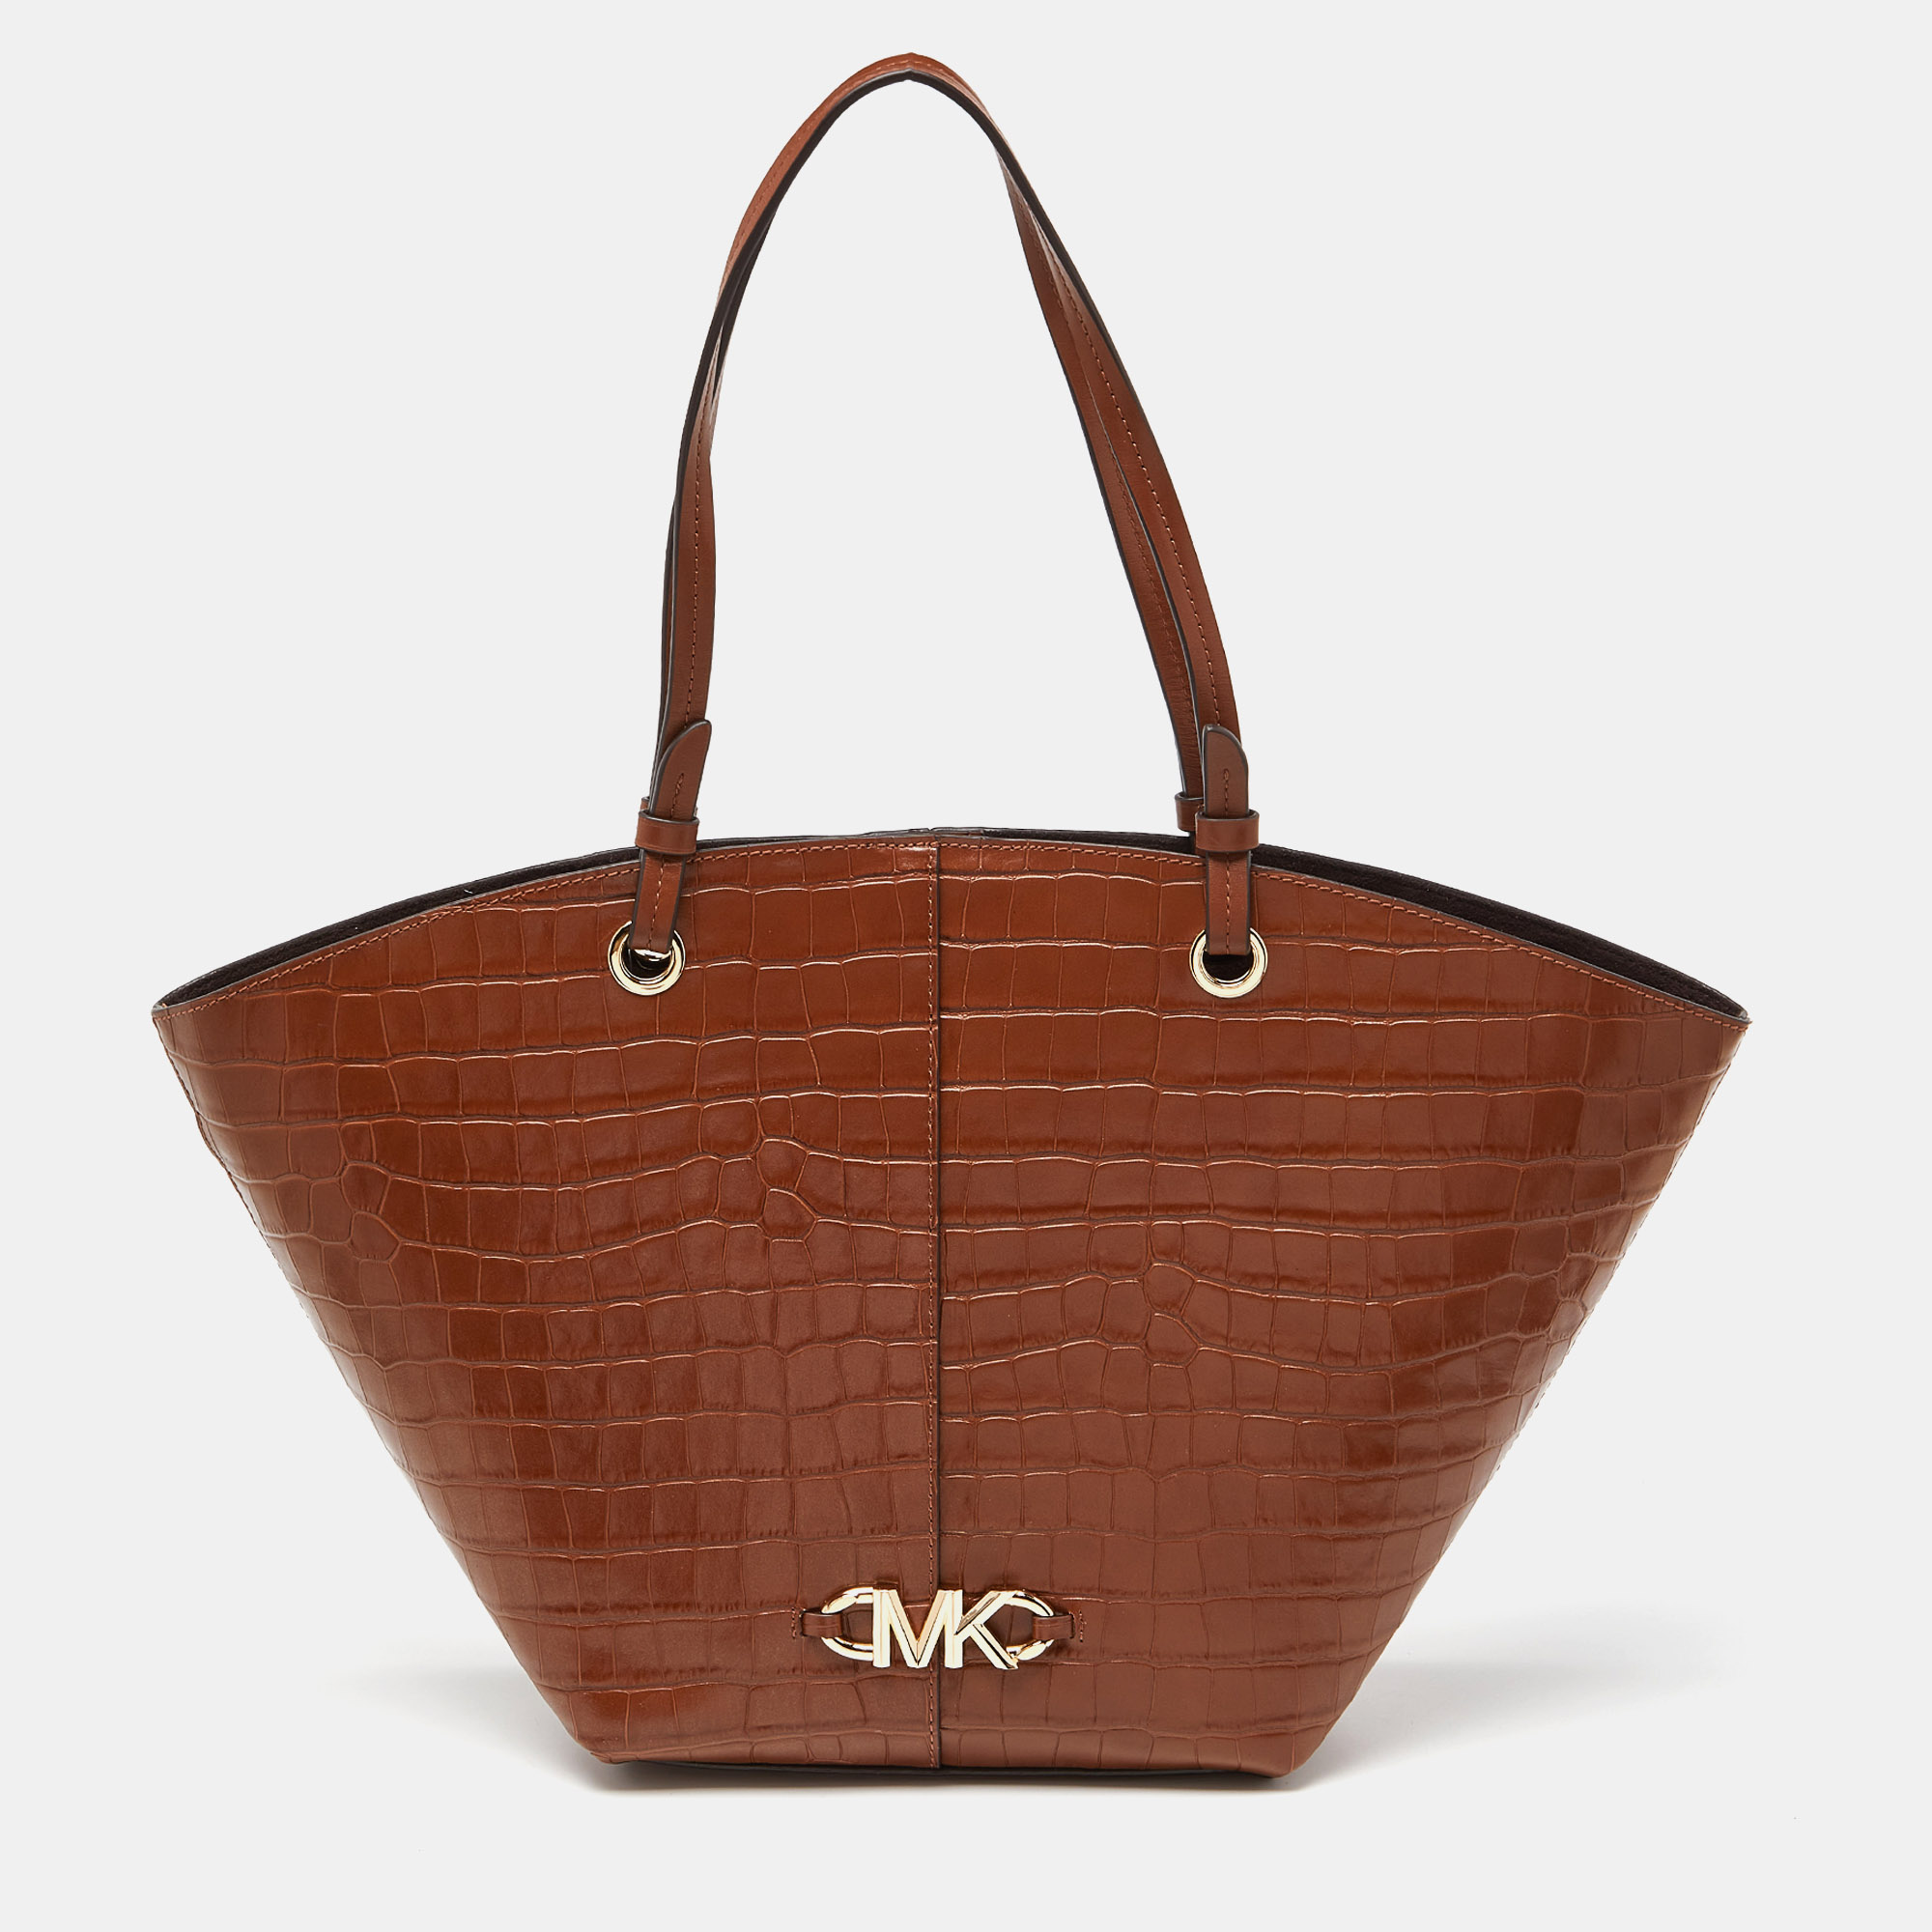 Striking a beautiful balance between essentiality and opulence this tote from the House of Michael Kors ensures that your handbag requirements are taken care of. It is equipped with practical features for all day ease.